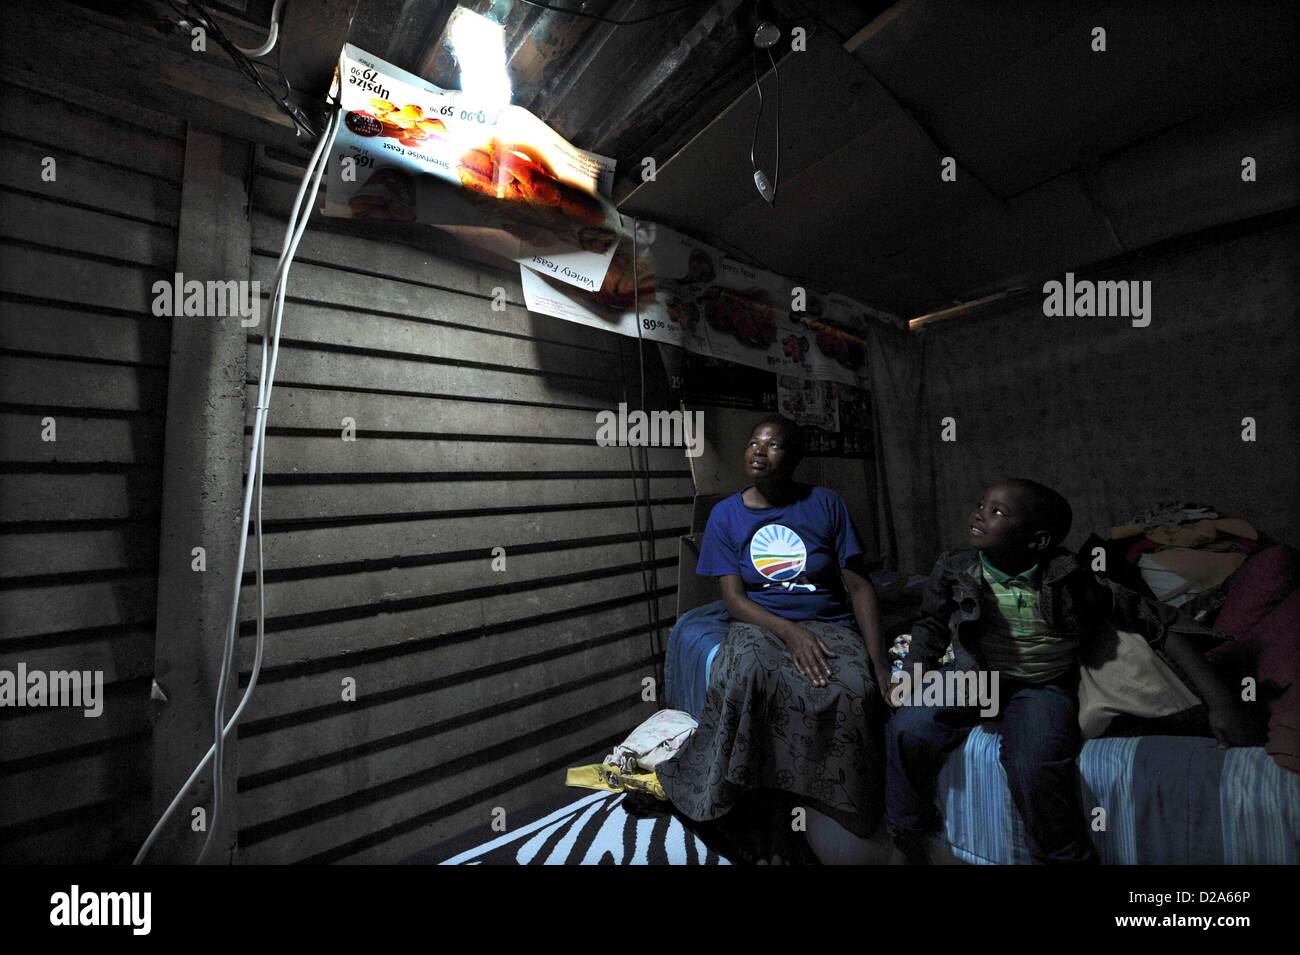 Johannesburg, South Africa. 18th January 2013.  Mavis Mabaso and her son Sphsihle showing their new bottle light on January 18, 2013, in Johannesburg, South Africa. The "Lïtre of Light" project puts plastic bottles filled with water in shack roofs, providing light to shacks with no electricity during the day. Credit:  Gallo images / Alamy Live News Stock Photo